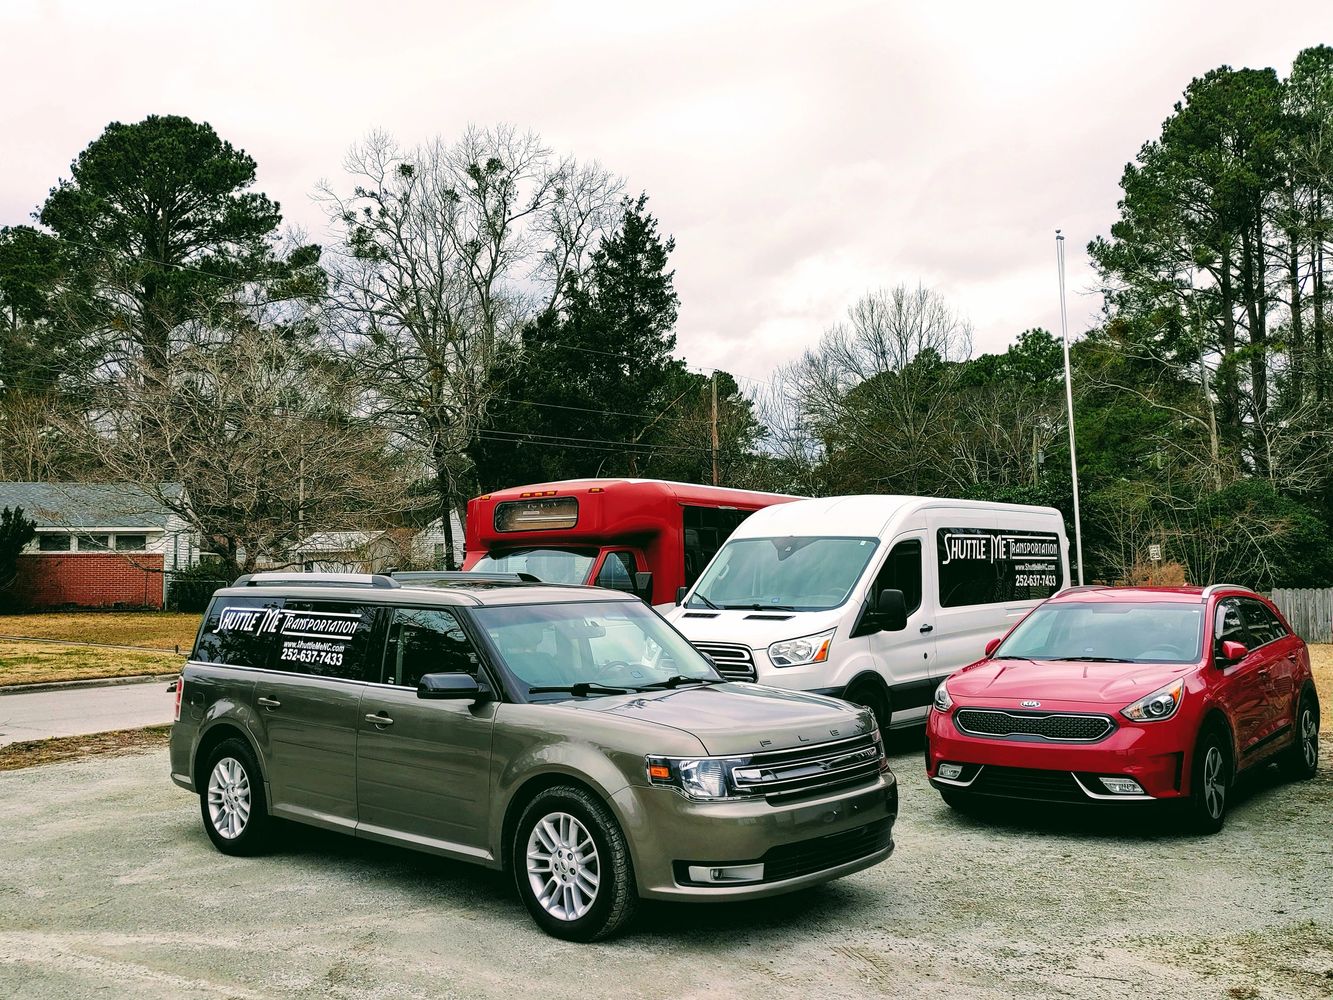 Our Fleet consists of a Shuttle bus, a Ford Transit, a Ford Flex,  and two Kia Niros. 